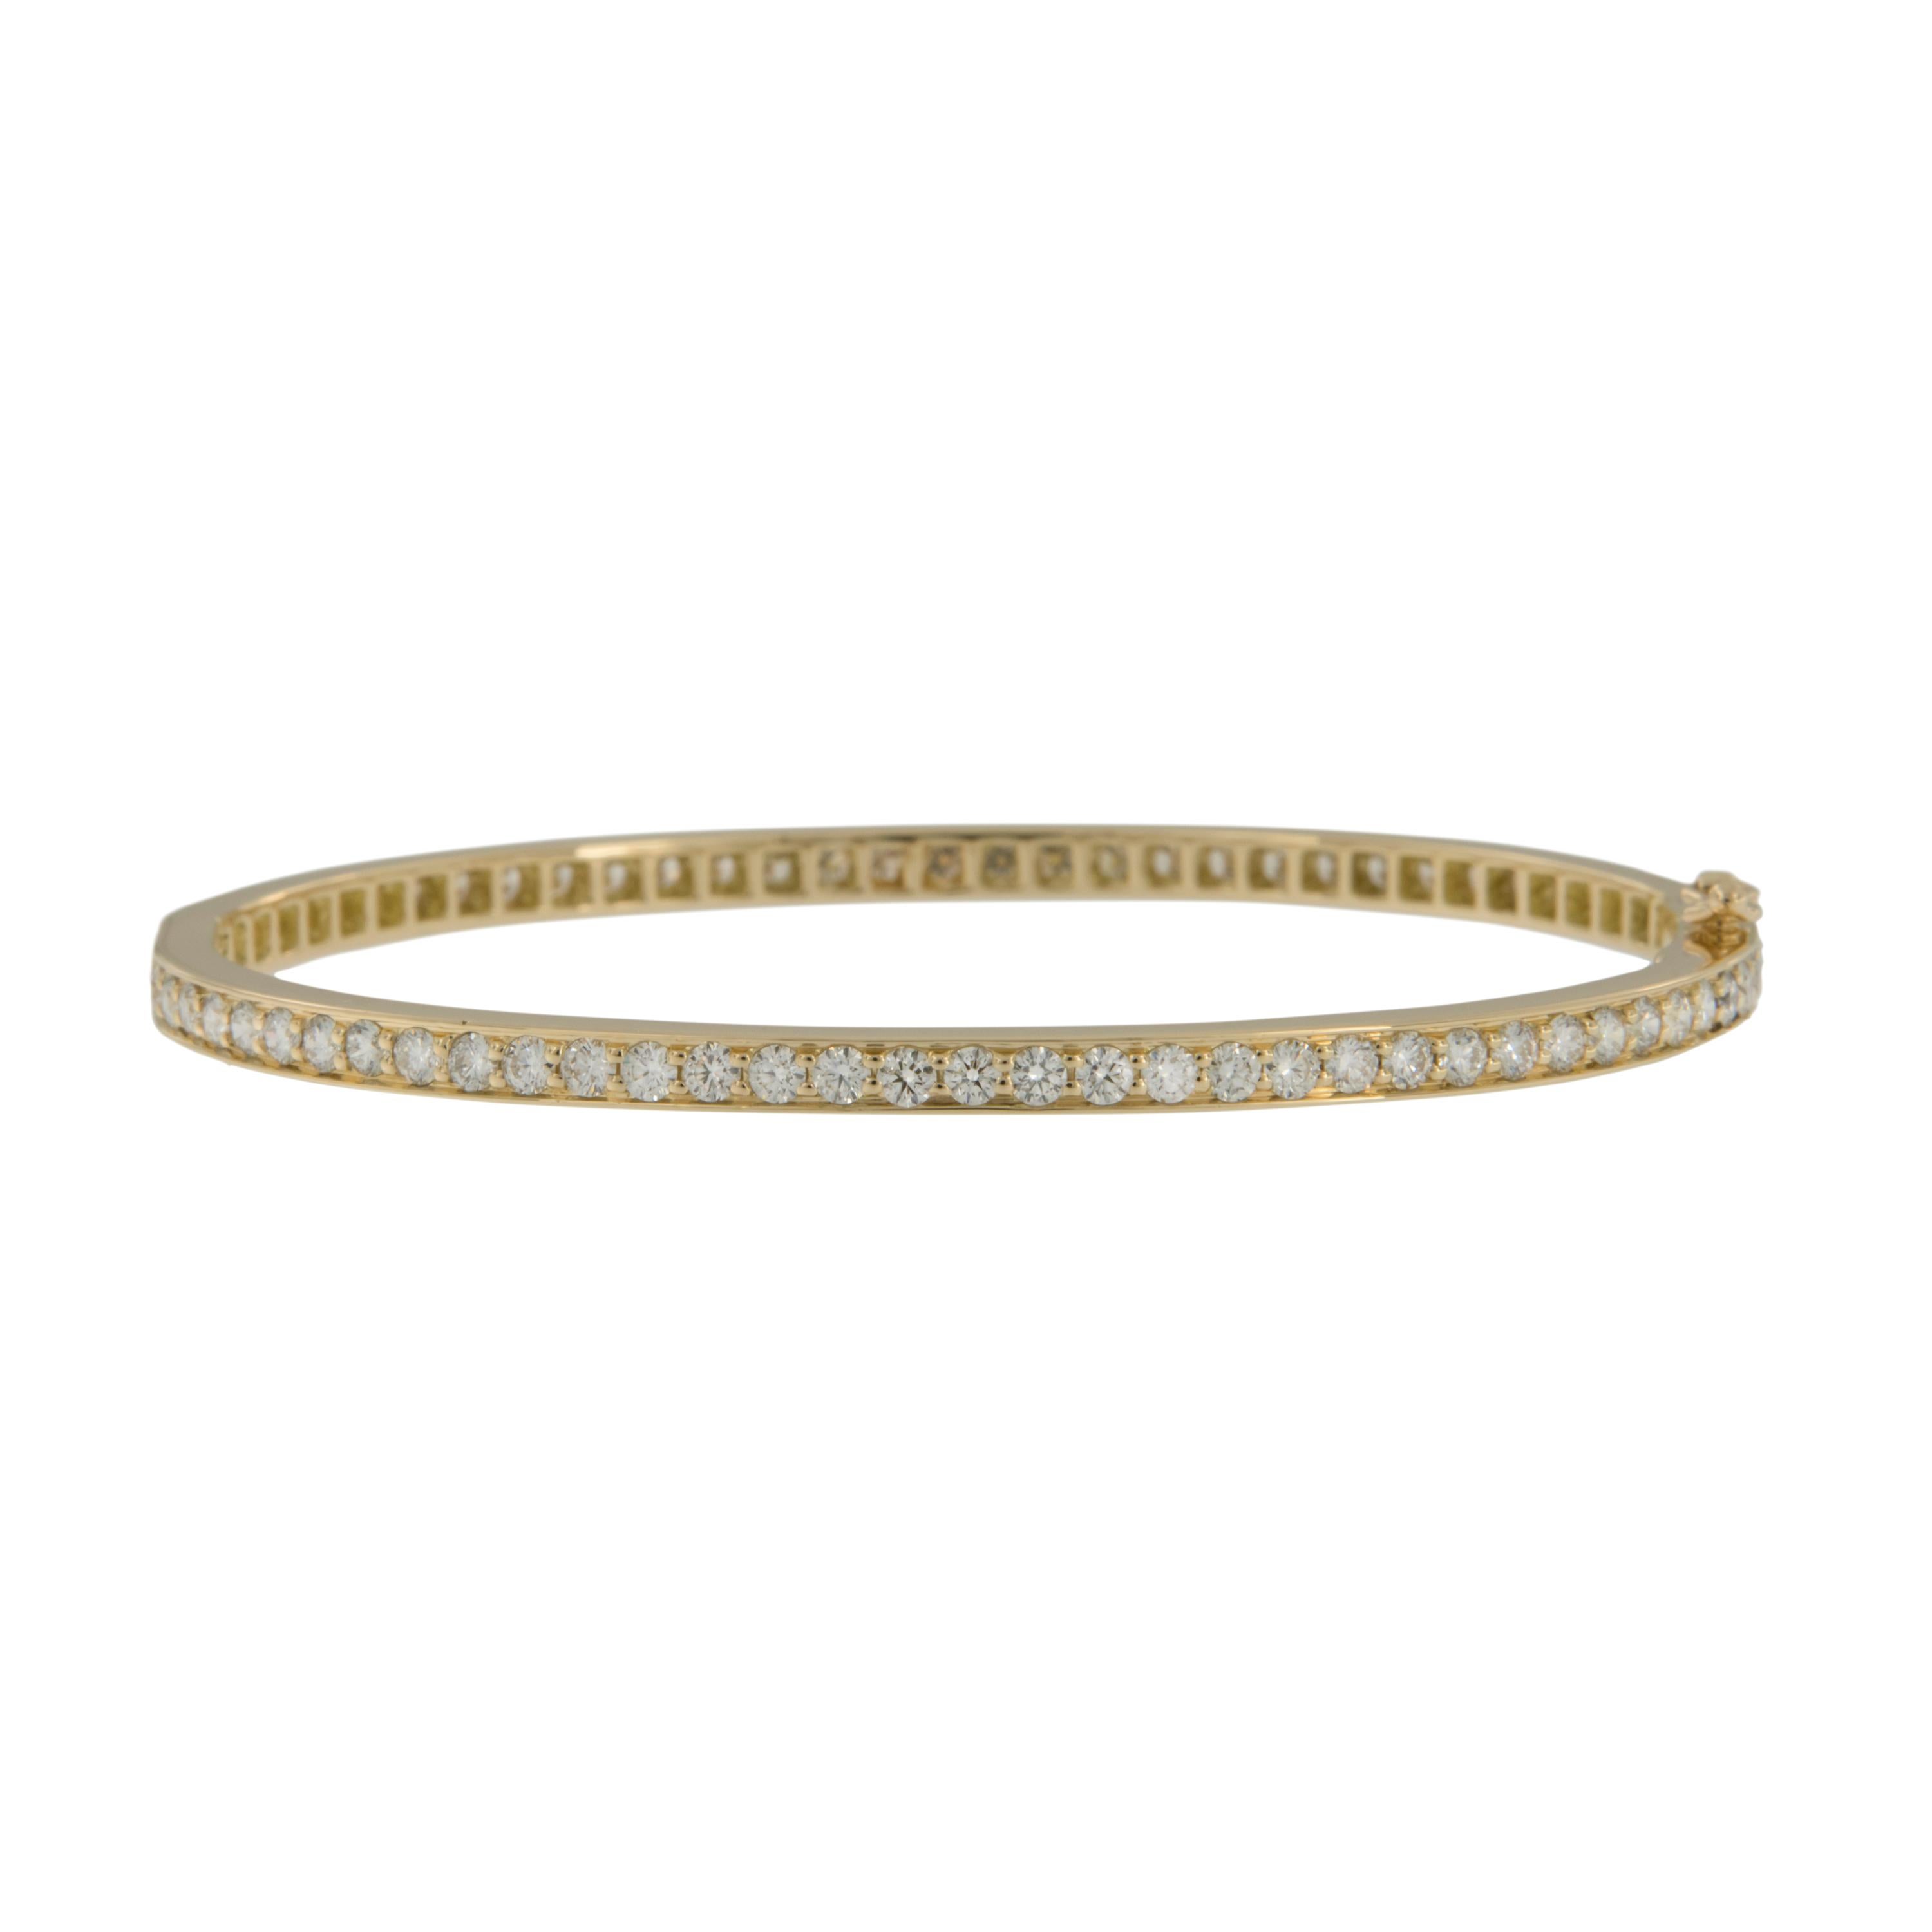 Why have it half way when you can have it all the way!? This timeless diamond bangle is unique in that it's 2.86 Cttw of fine diamonds (F - G, VVS-VS1) are set eternity style, going all the way around for the owner that deserves it all! Bracelet is